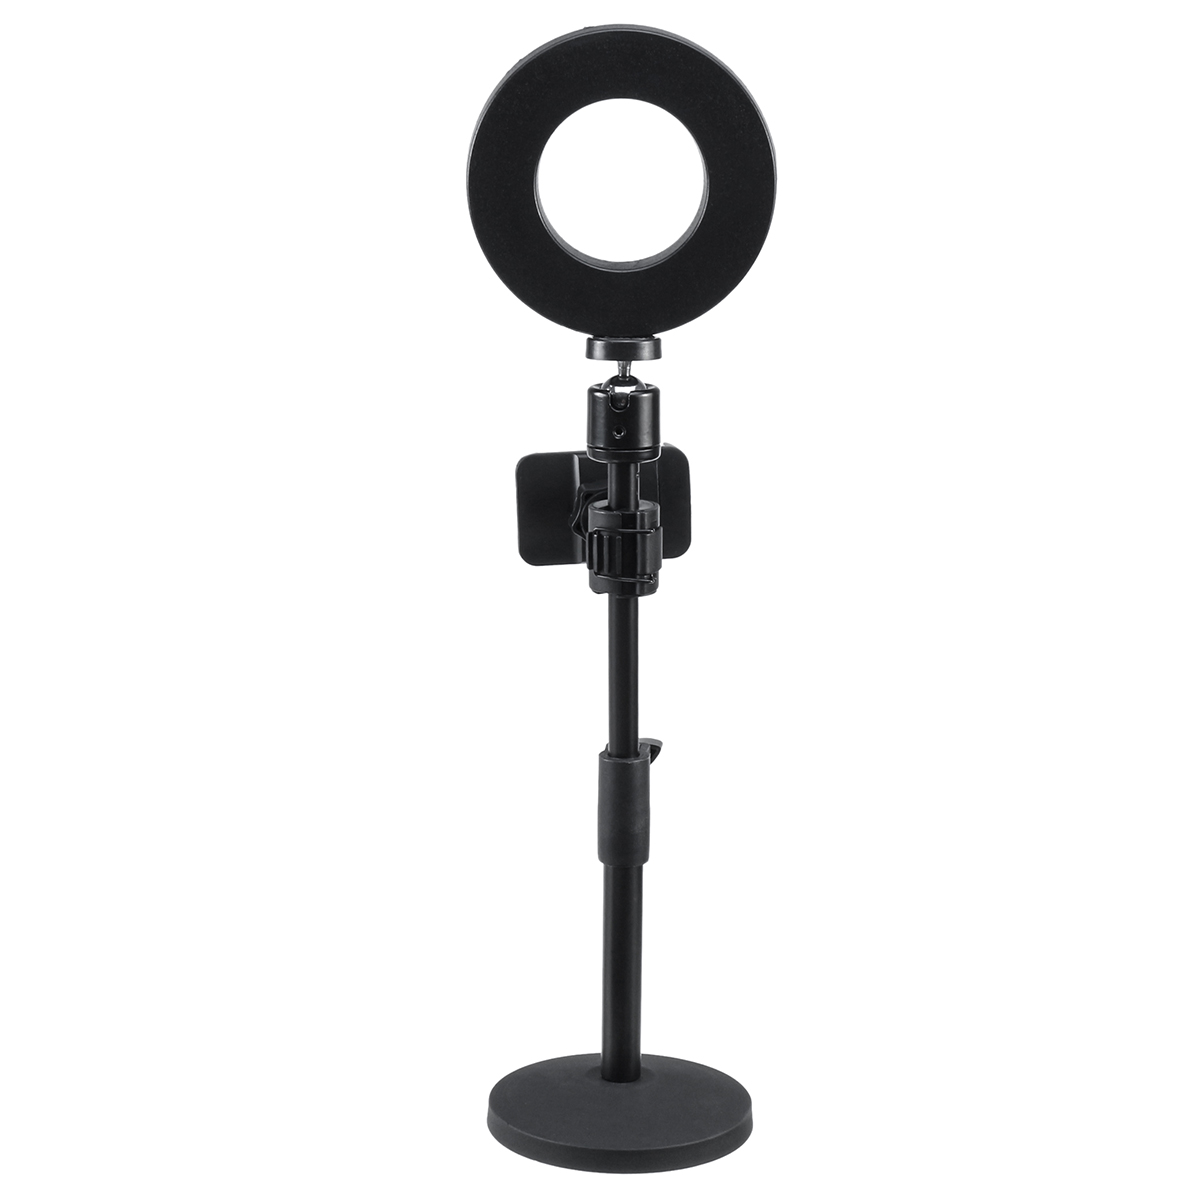 1395quot-Dimmable-LED-Ring-Light-Stand-Photo-Video-Camera-Phone-For-Youtube-Live-1675306-13